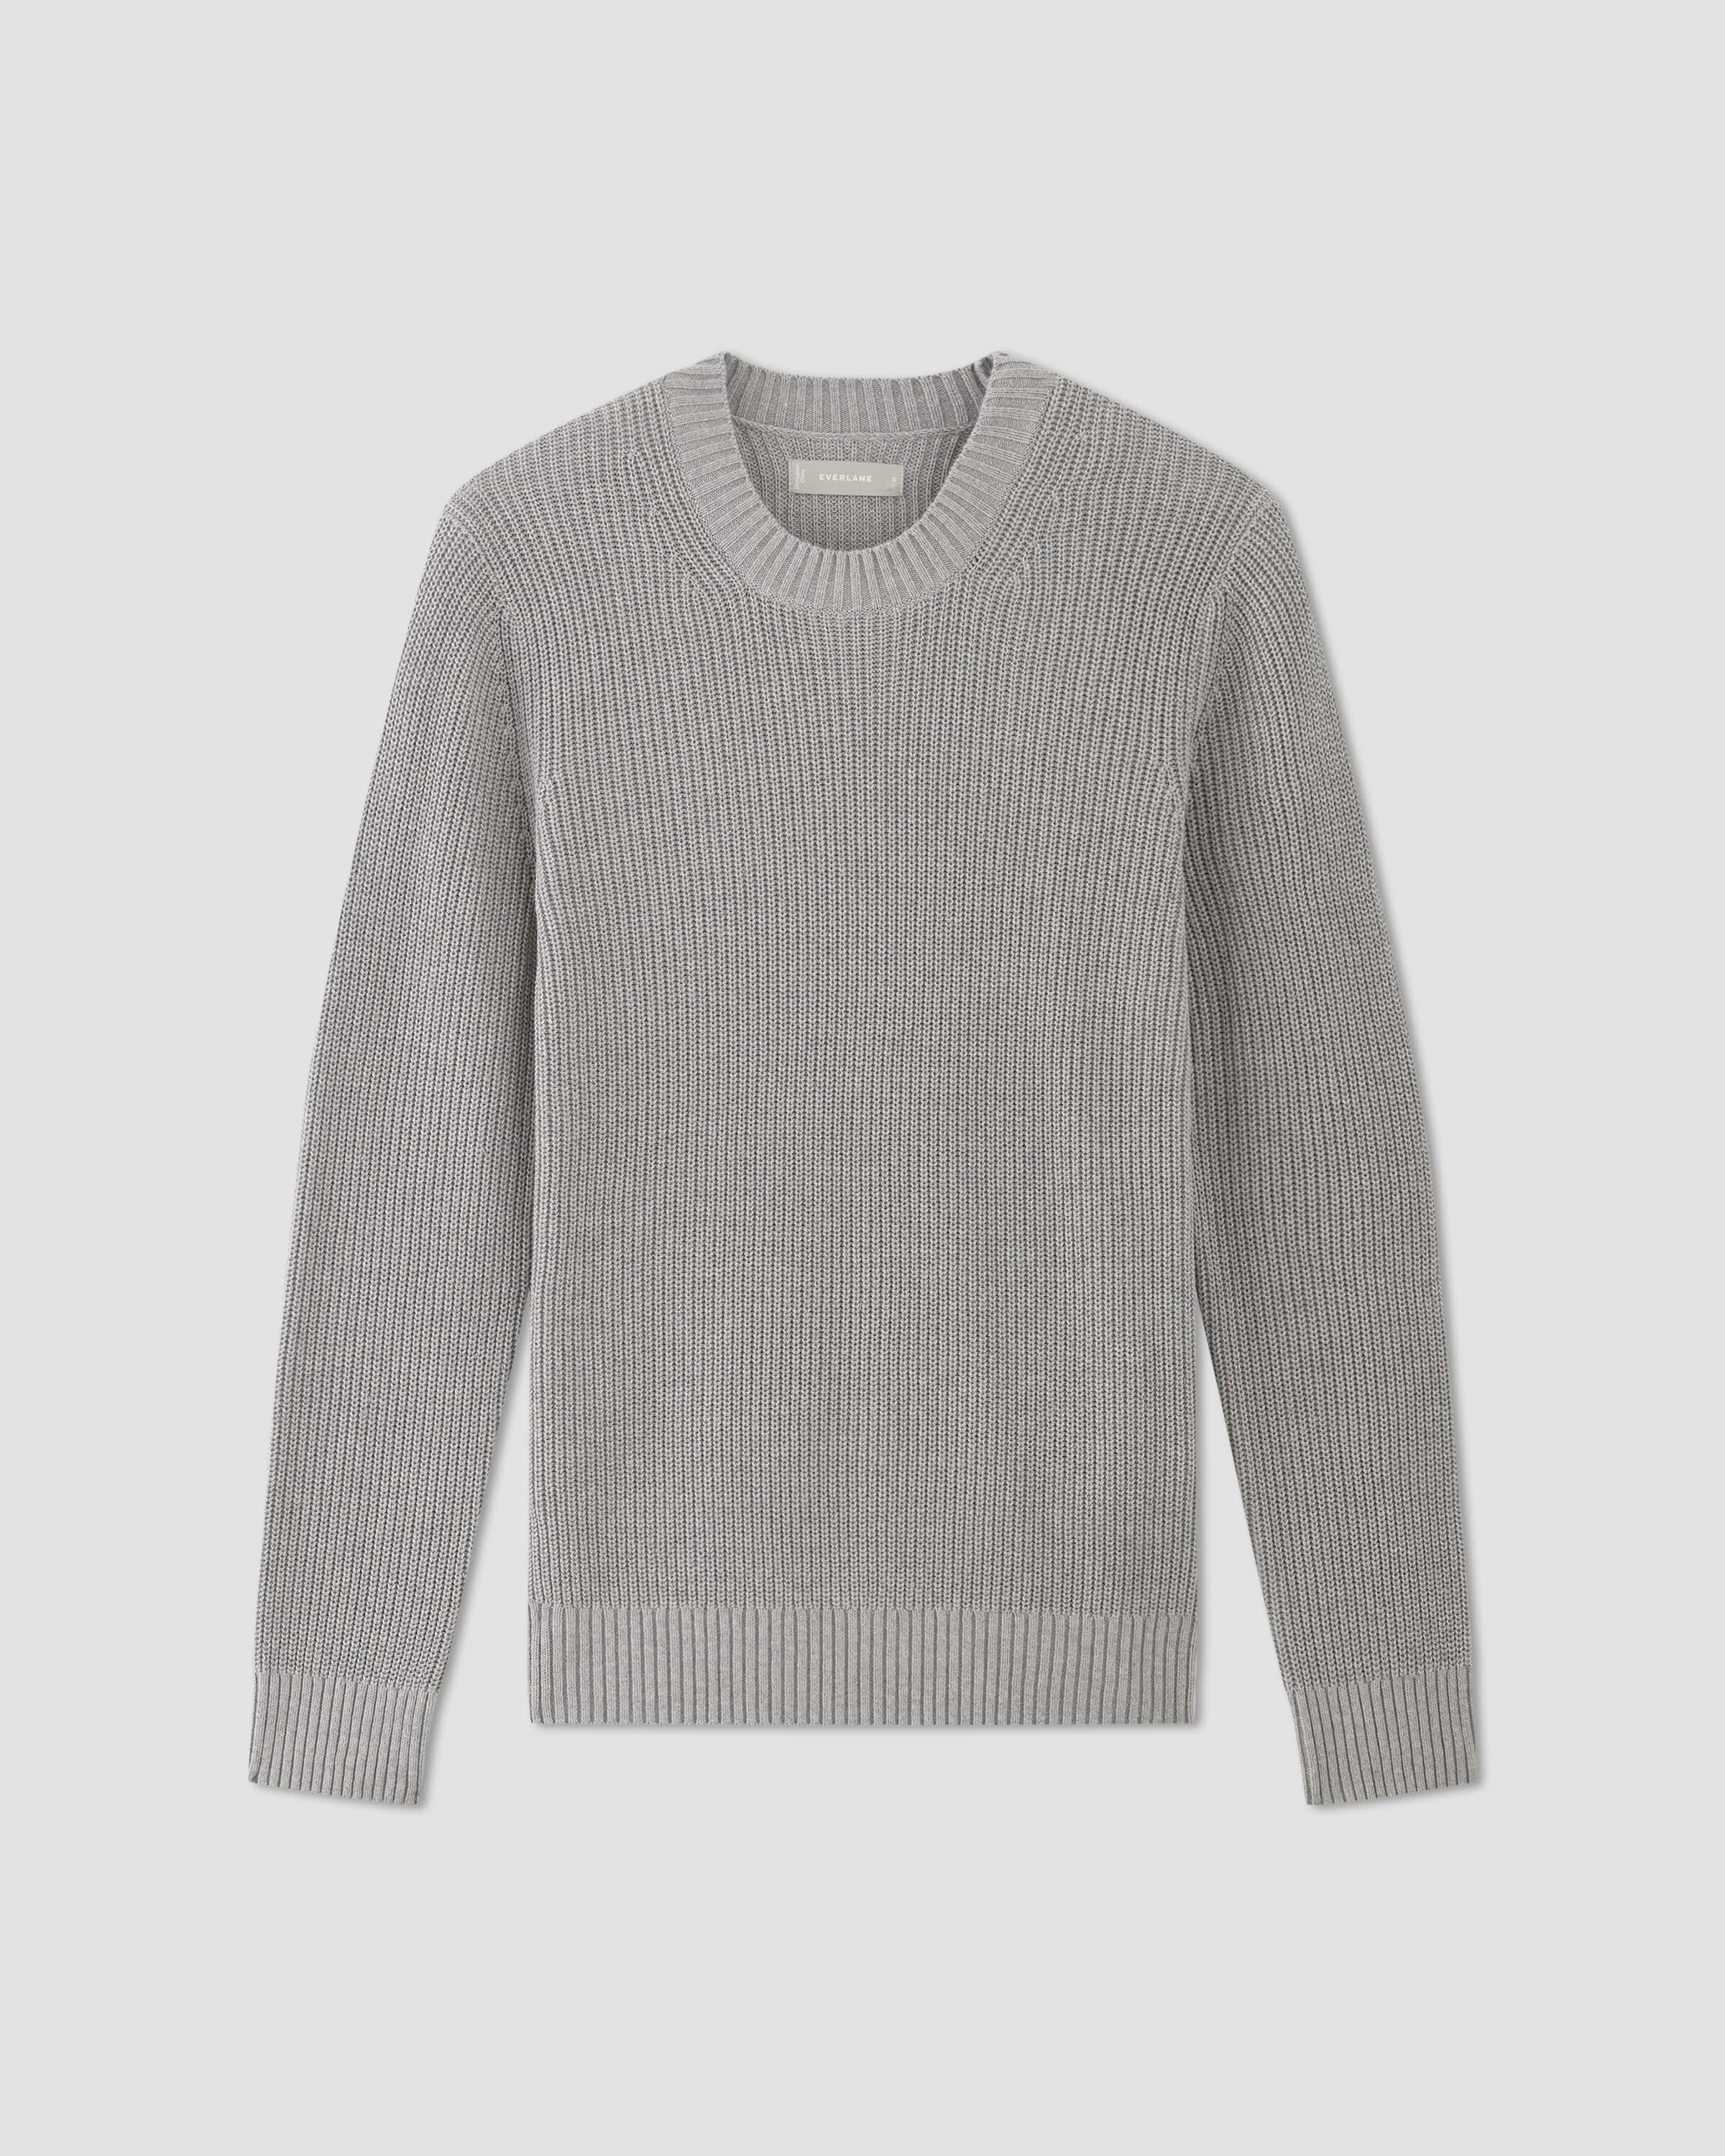 The No-Sweat Ribbed Crew by EVERLANE